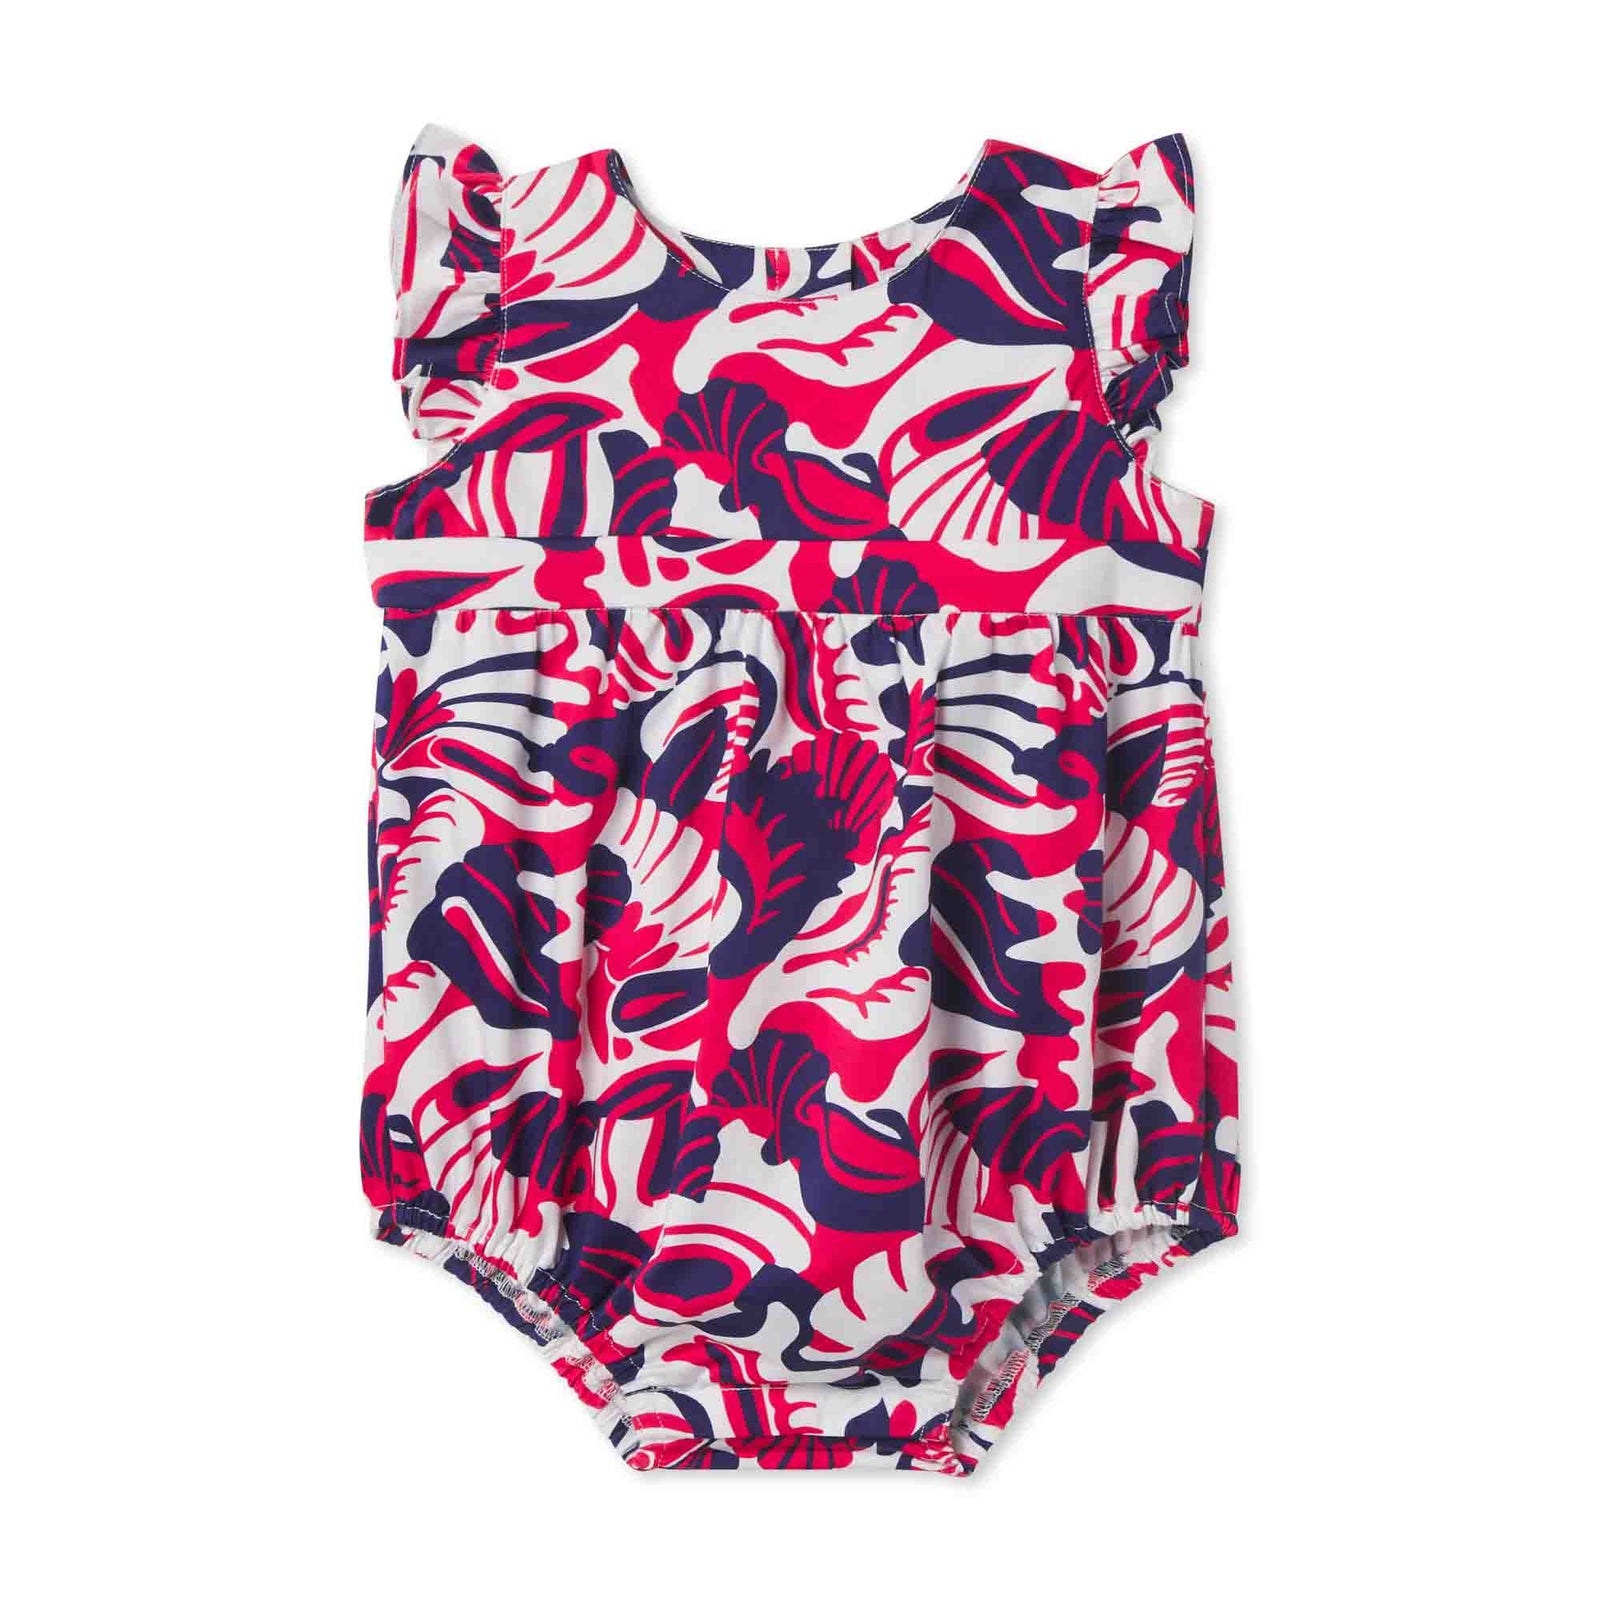 Frances Valentine Reese One Piece Swimsuit Candy Stripe